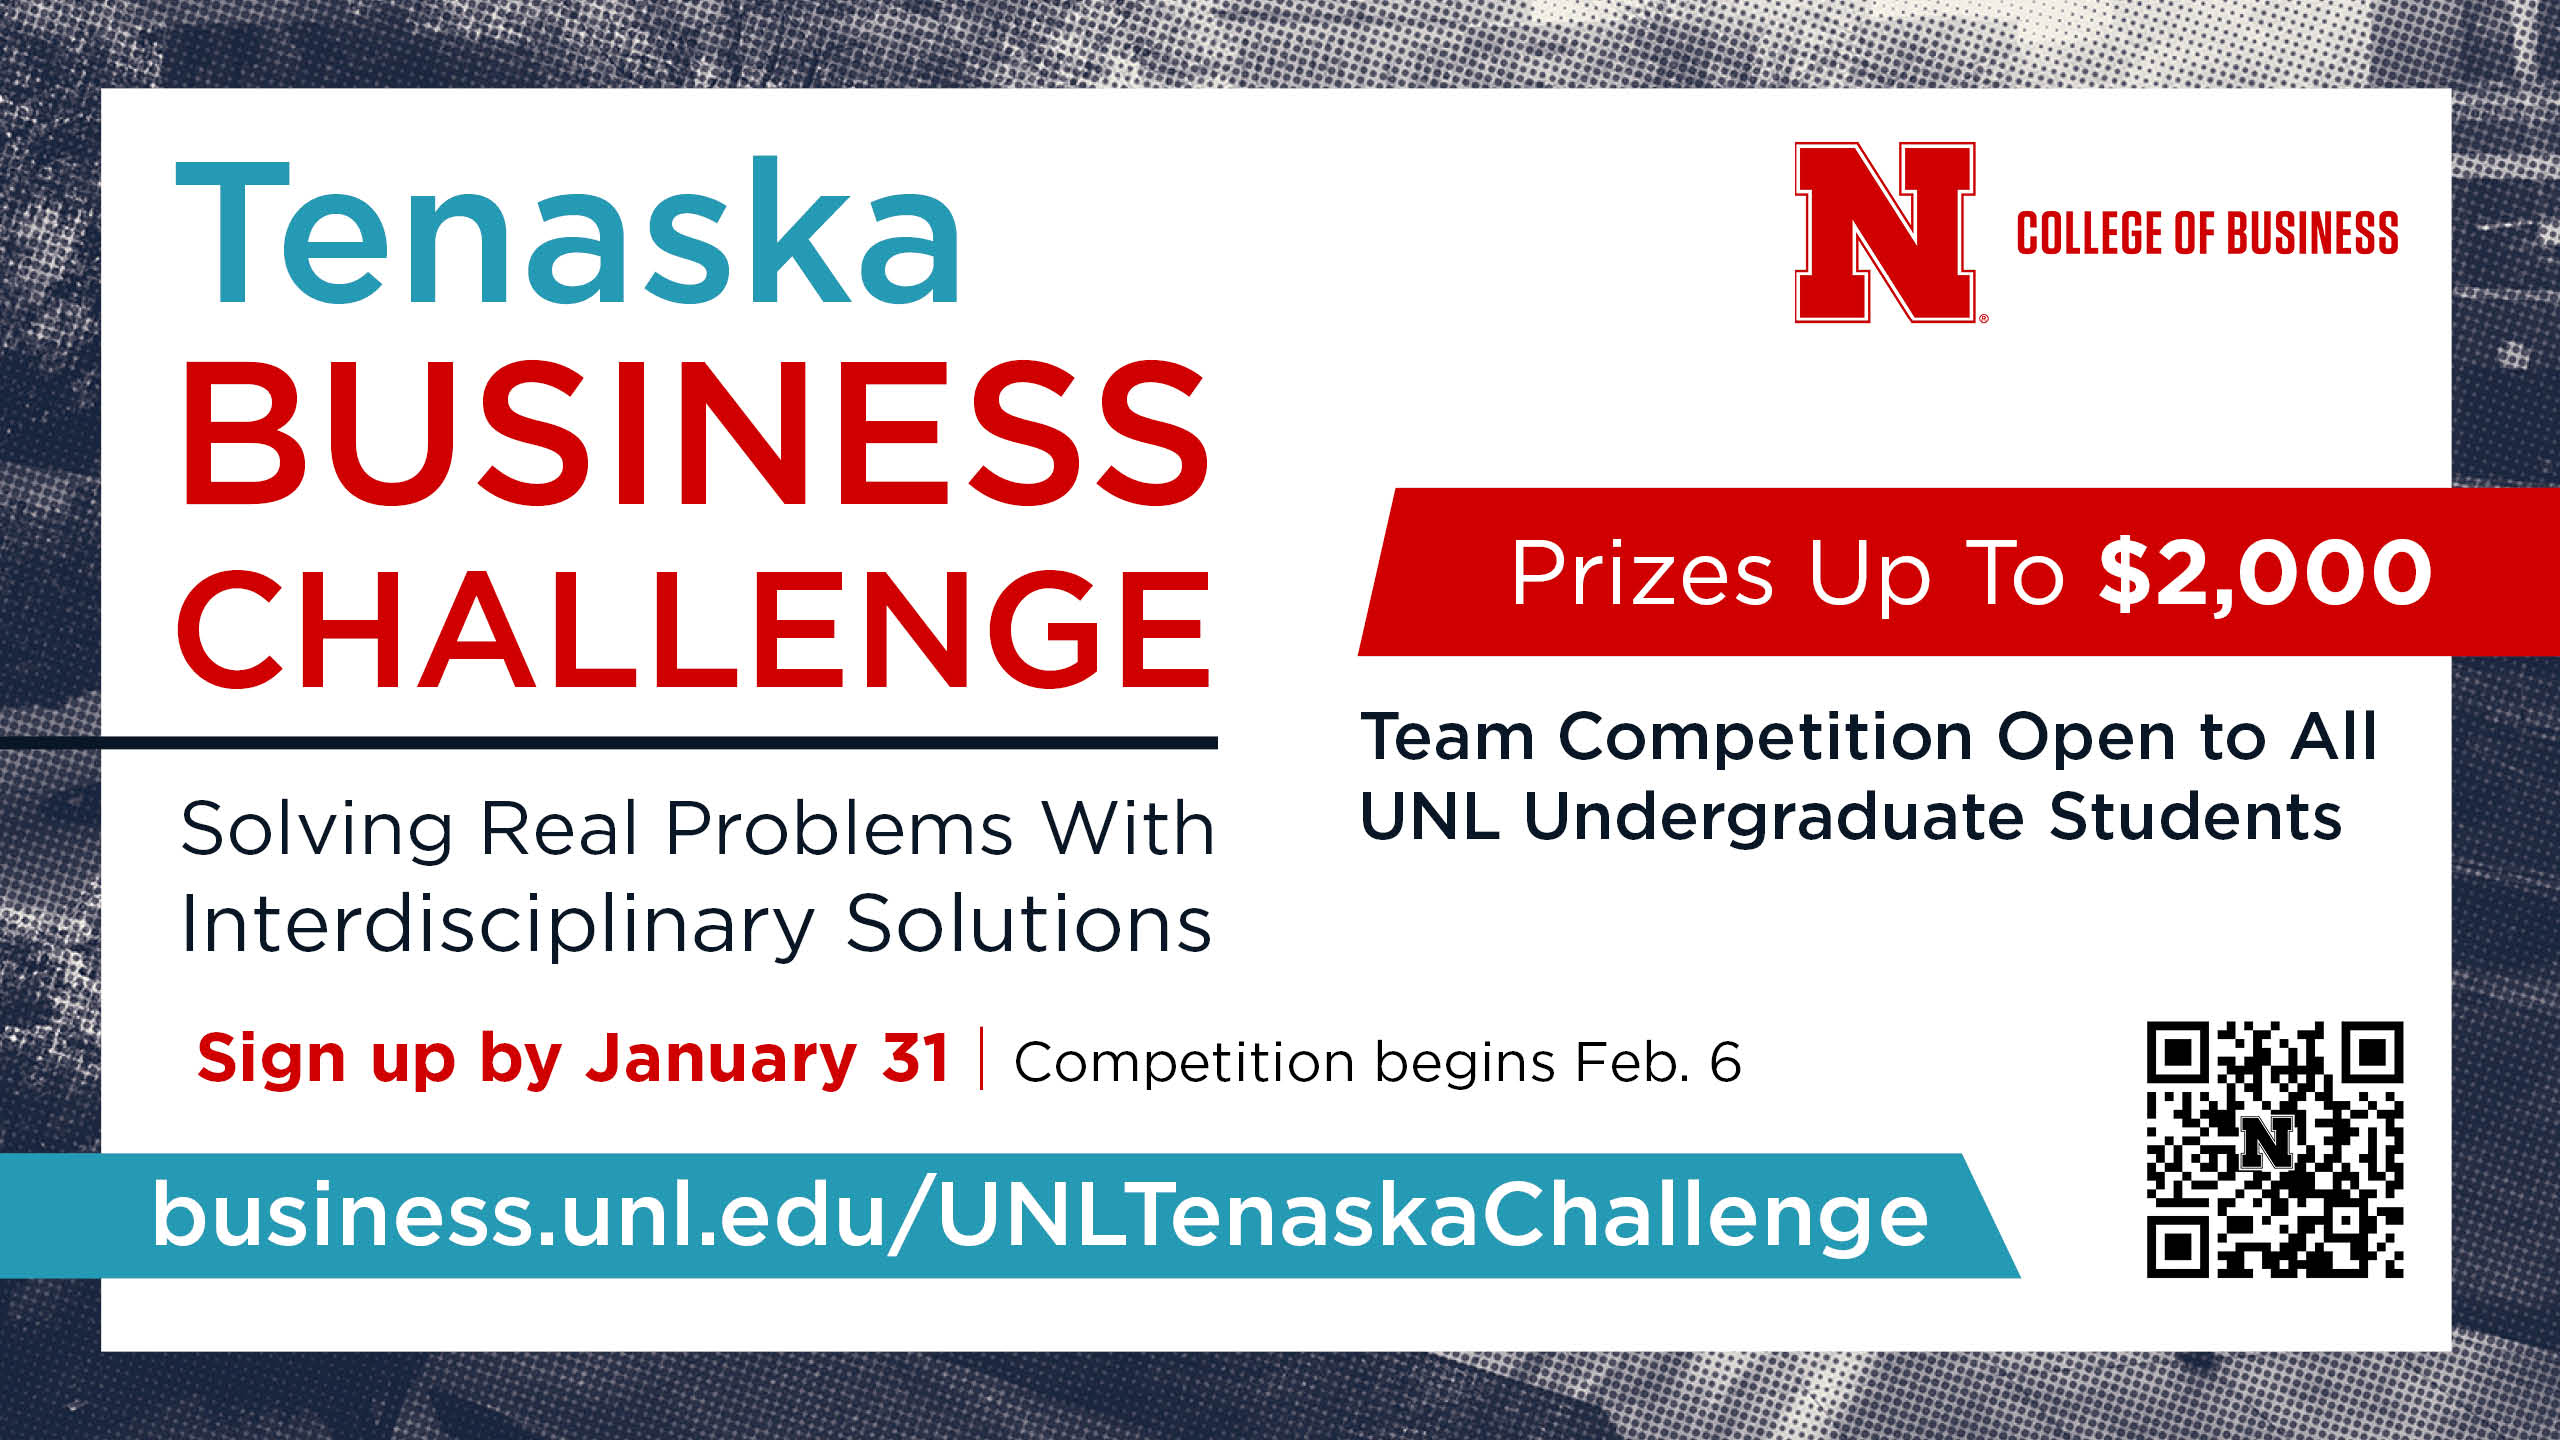 Solve real problems with interdisciplinary solutions while competing for cash prizes in the inaugural Tenaska Business Challenge.